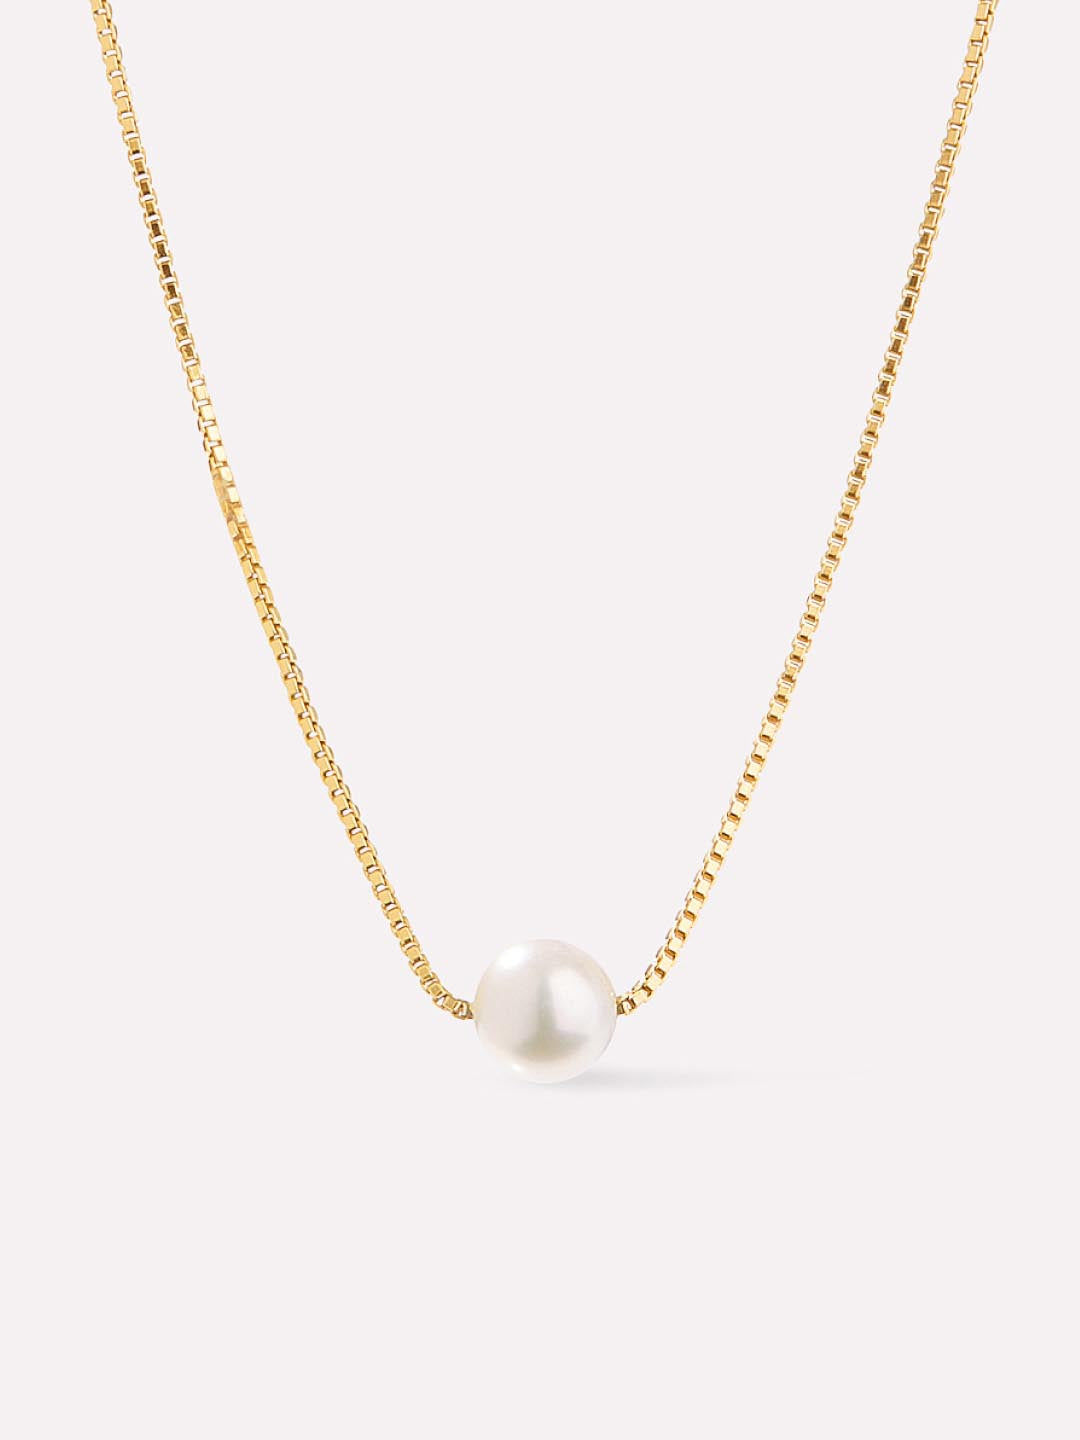 Minimalist Real Pearl Necklace Freshwater Choker Layered Pendant Necklace  Jewelry For Women, 2mm/3 4mm Size, Simple And Delicate Design From  Yy_dhhome, $14 | DHgate.Com